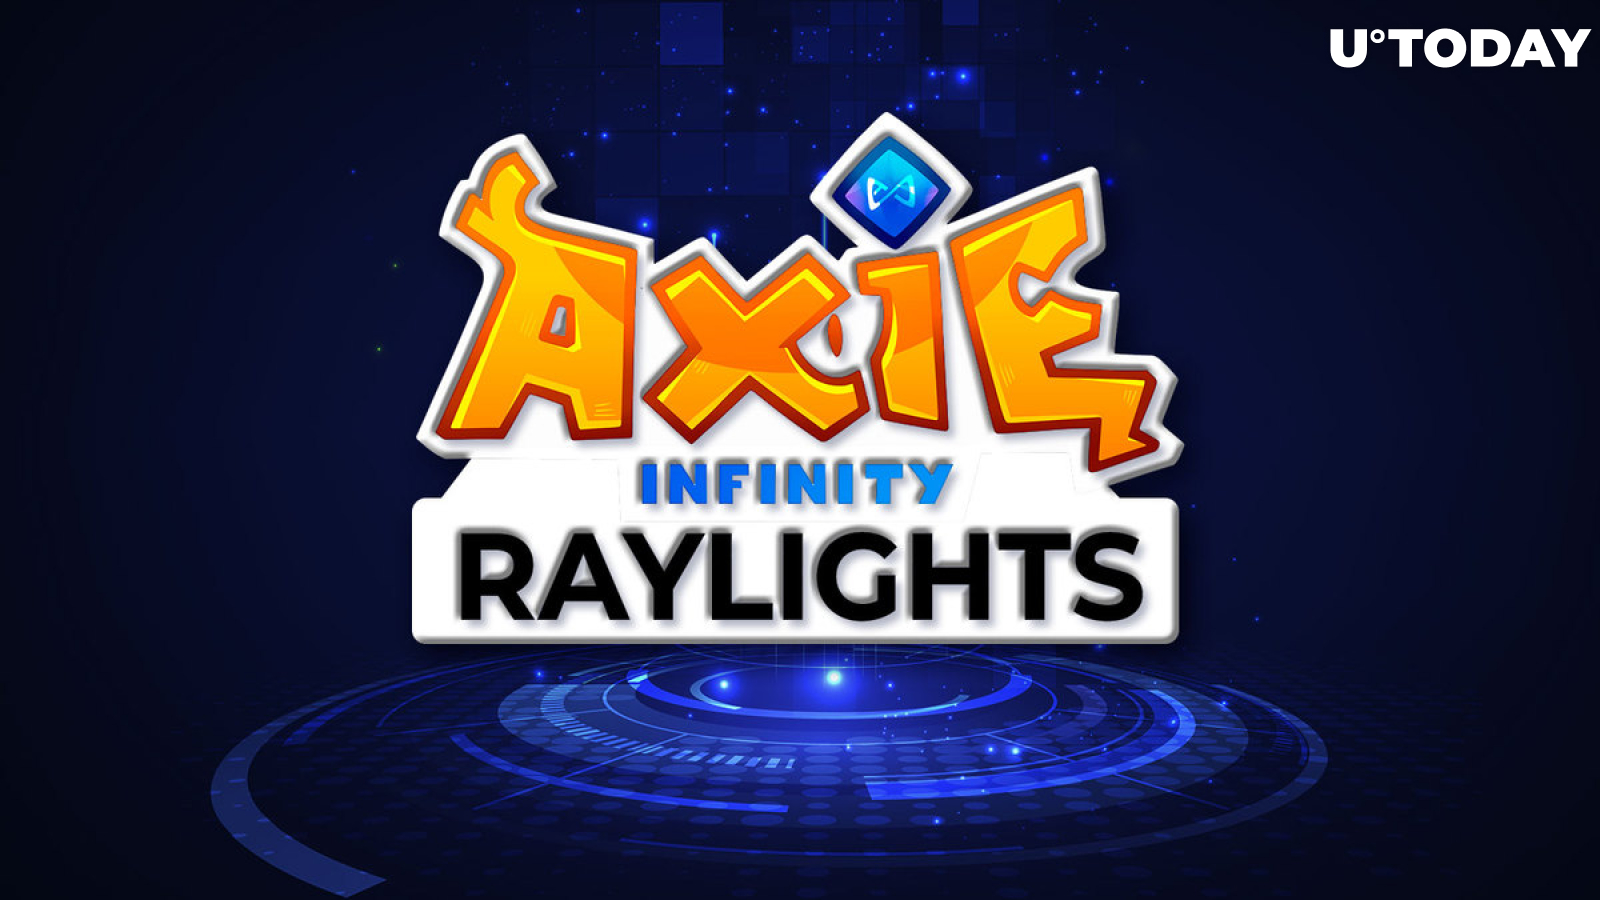 Axie Infinity Launches Mini Game Raylights: Details